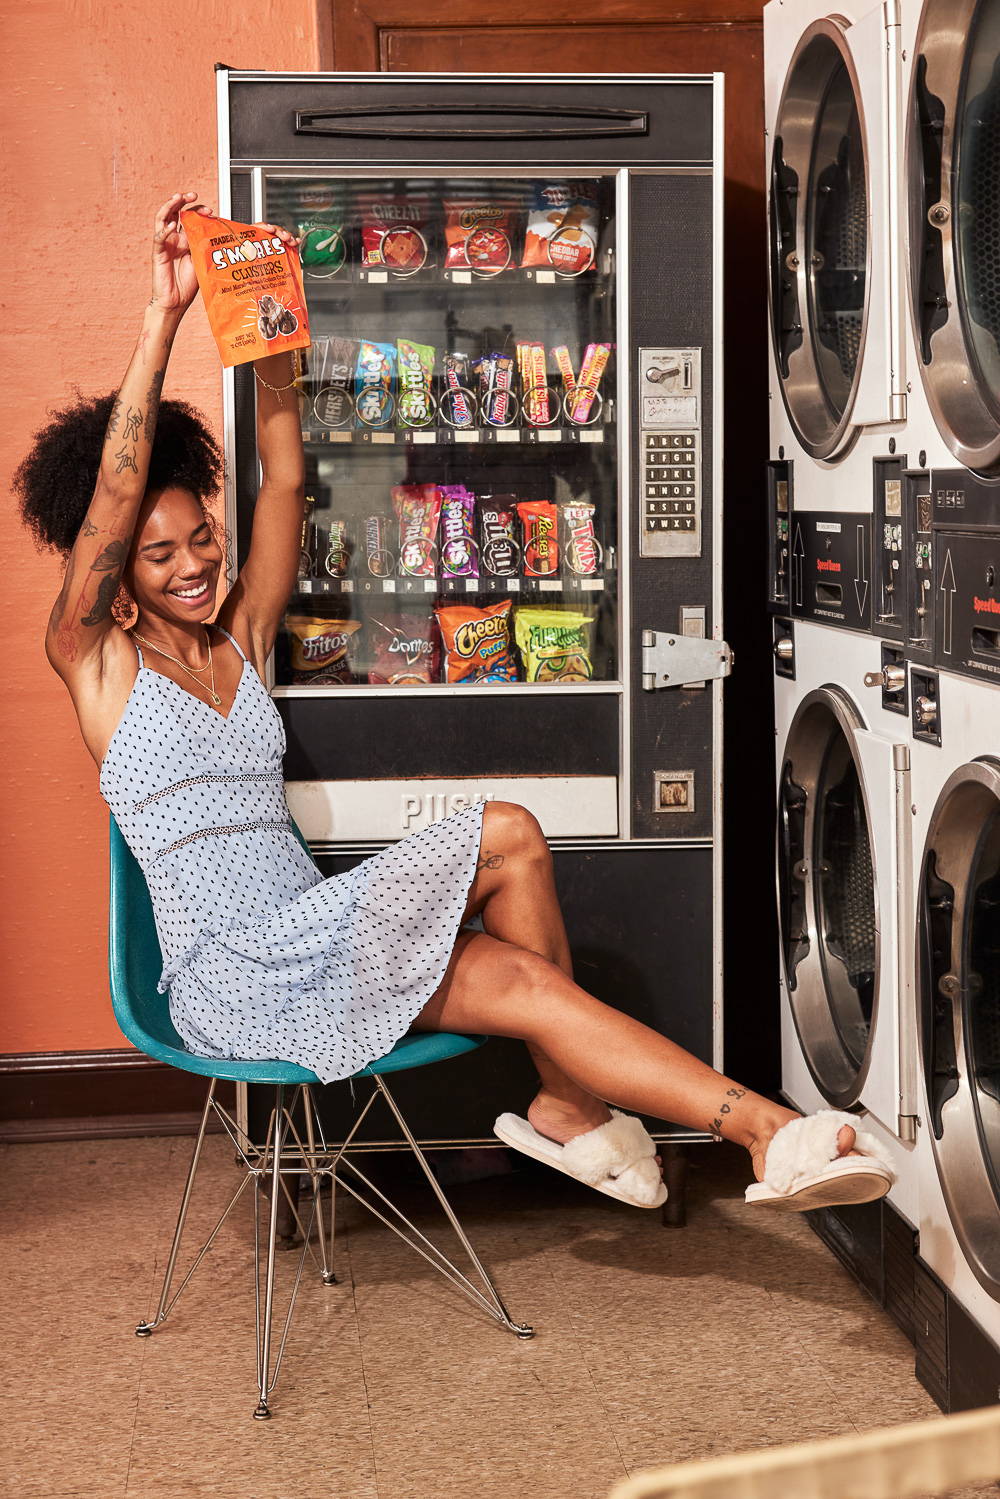 Trixxi Back to school embracing dorm life doing laundry in a sky blue dot printed tier strappy dress.